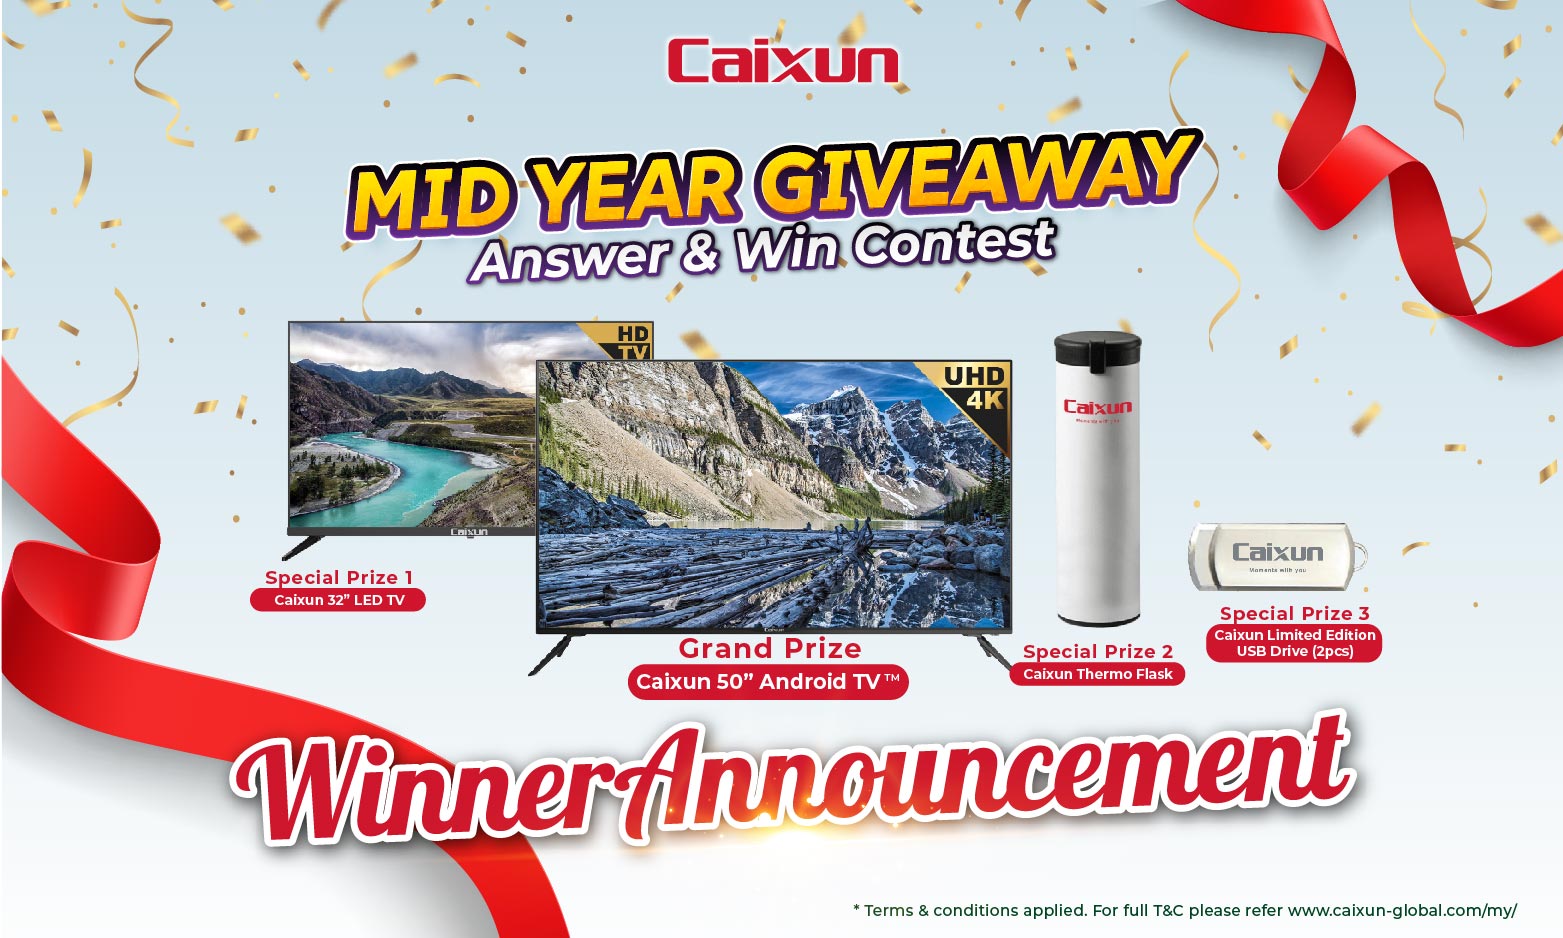 Caixun Malaysia Mid-Year Giveaway Campaign 2022: Winner Announcement